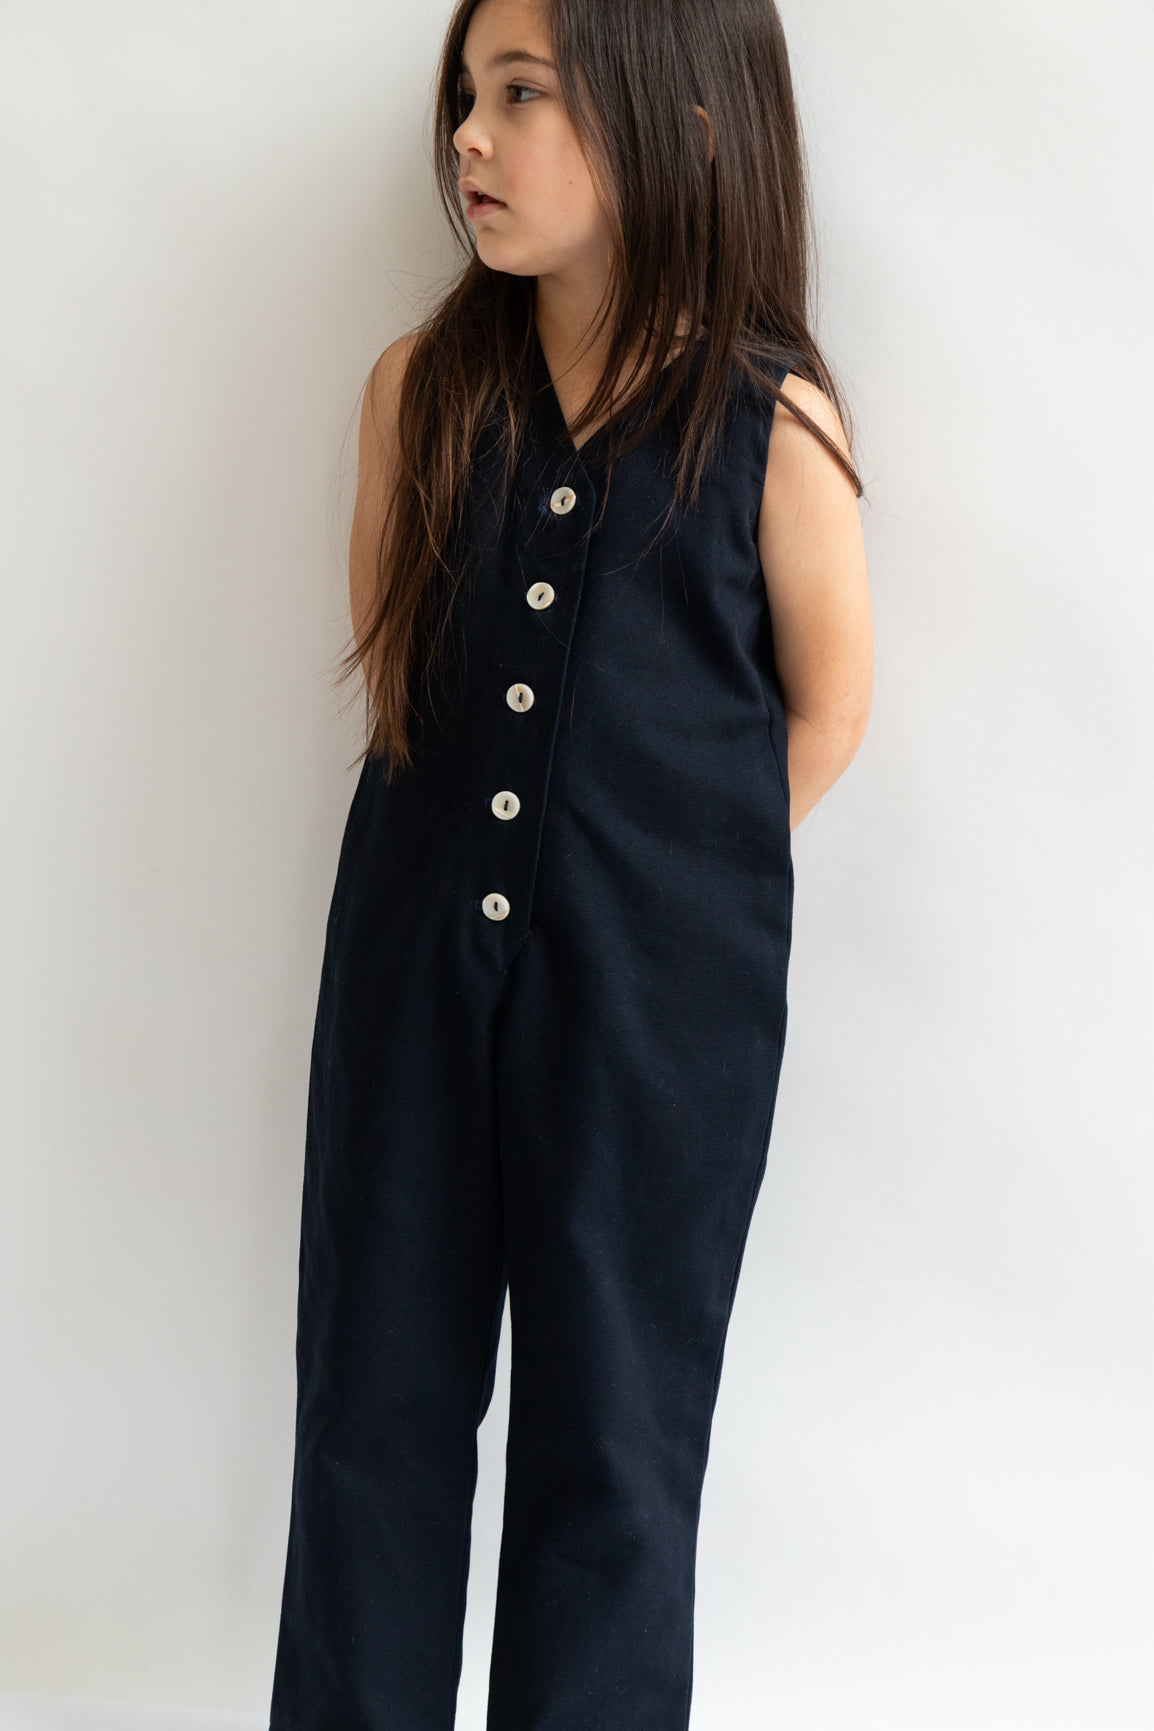 Navy dark blue color Kids Mini Jumpsuit overall workwear cotton canvas 5 buttons v-neck OEKO-TEX sustainable clothes handmade